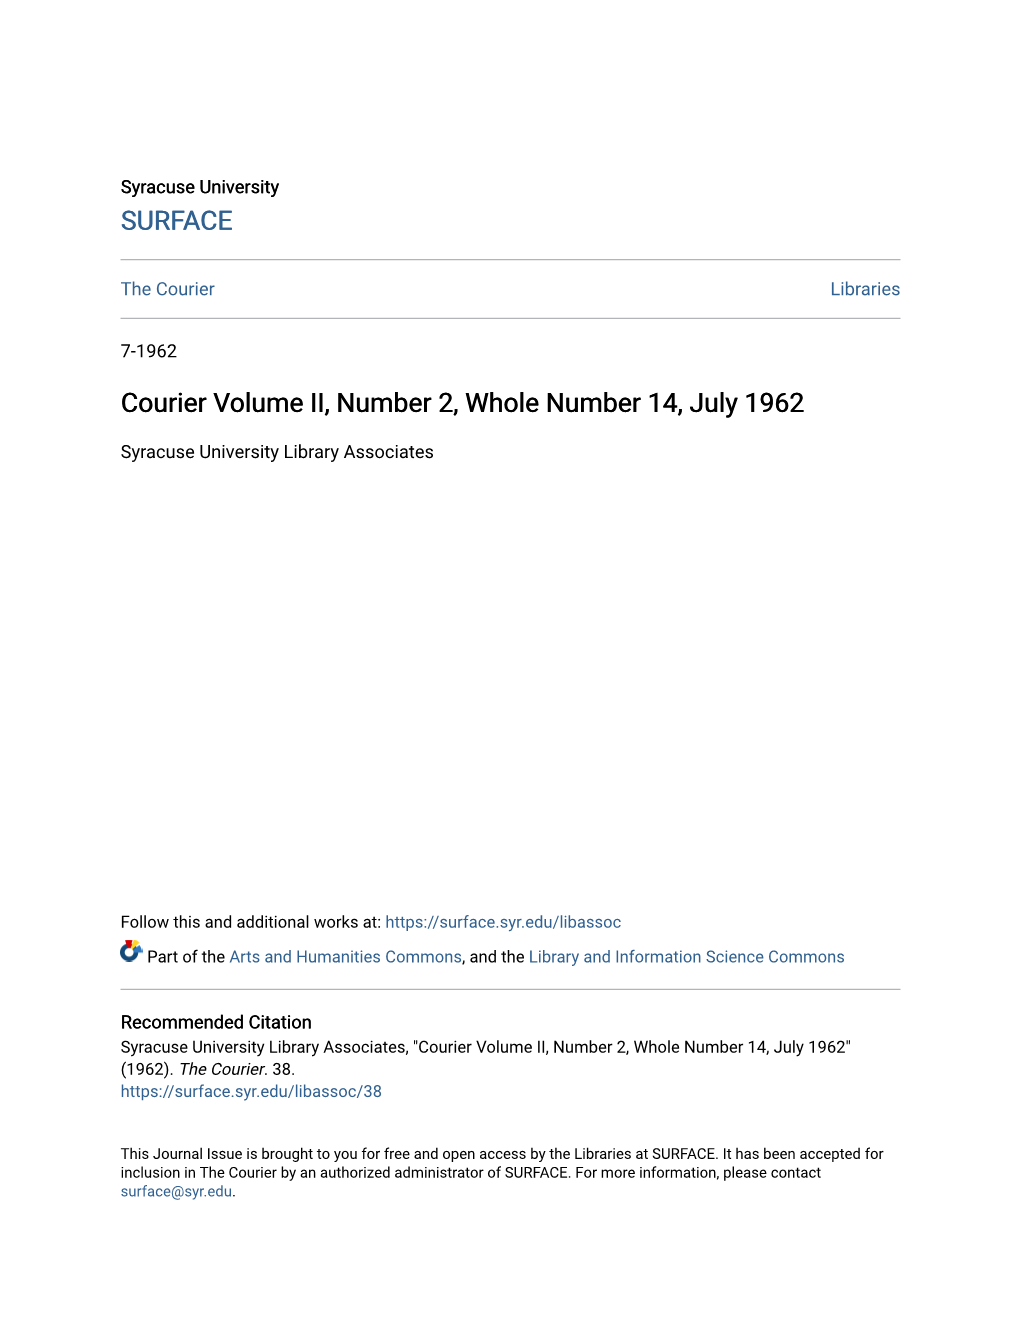 Courier Volume II, Number 2, Whole Number 14, July 1962